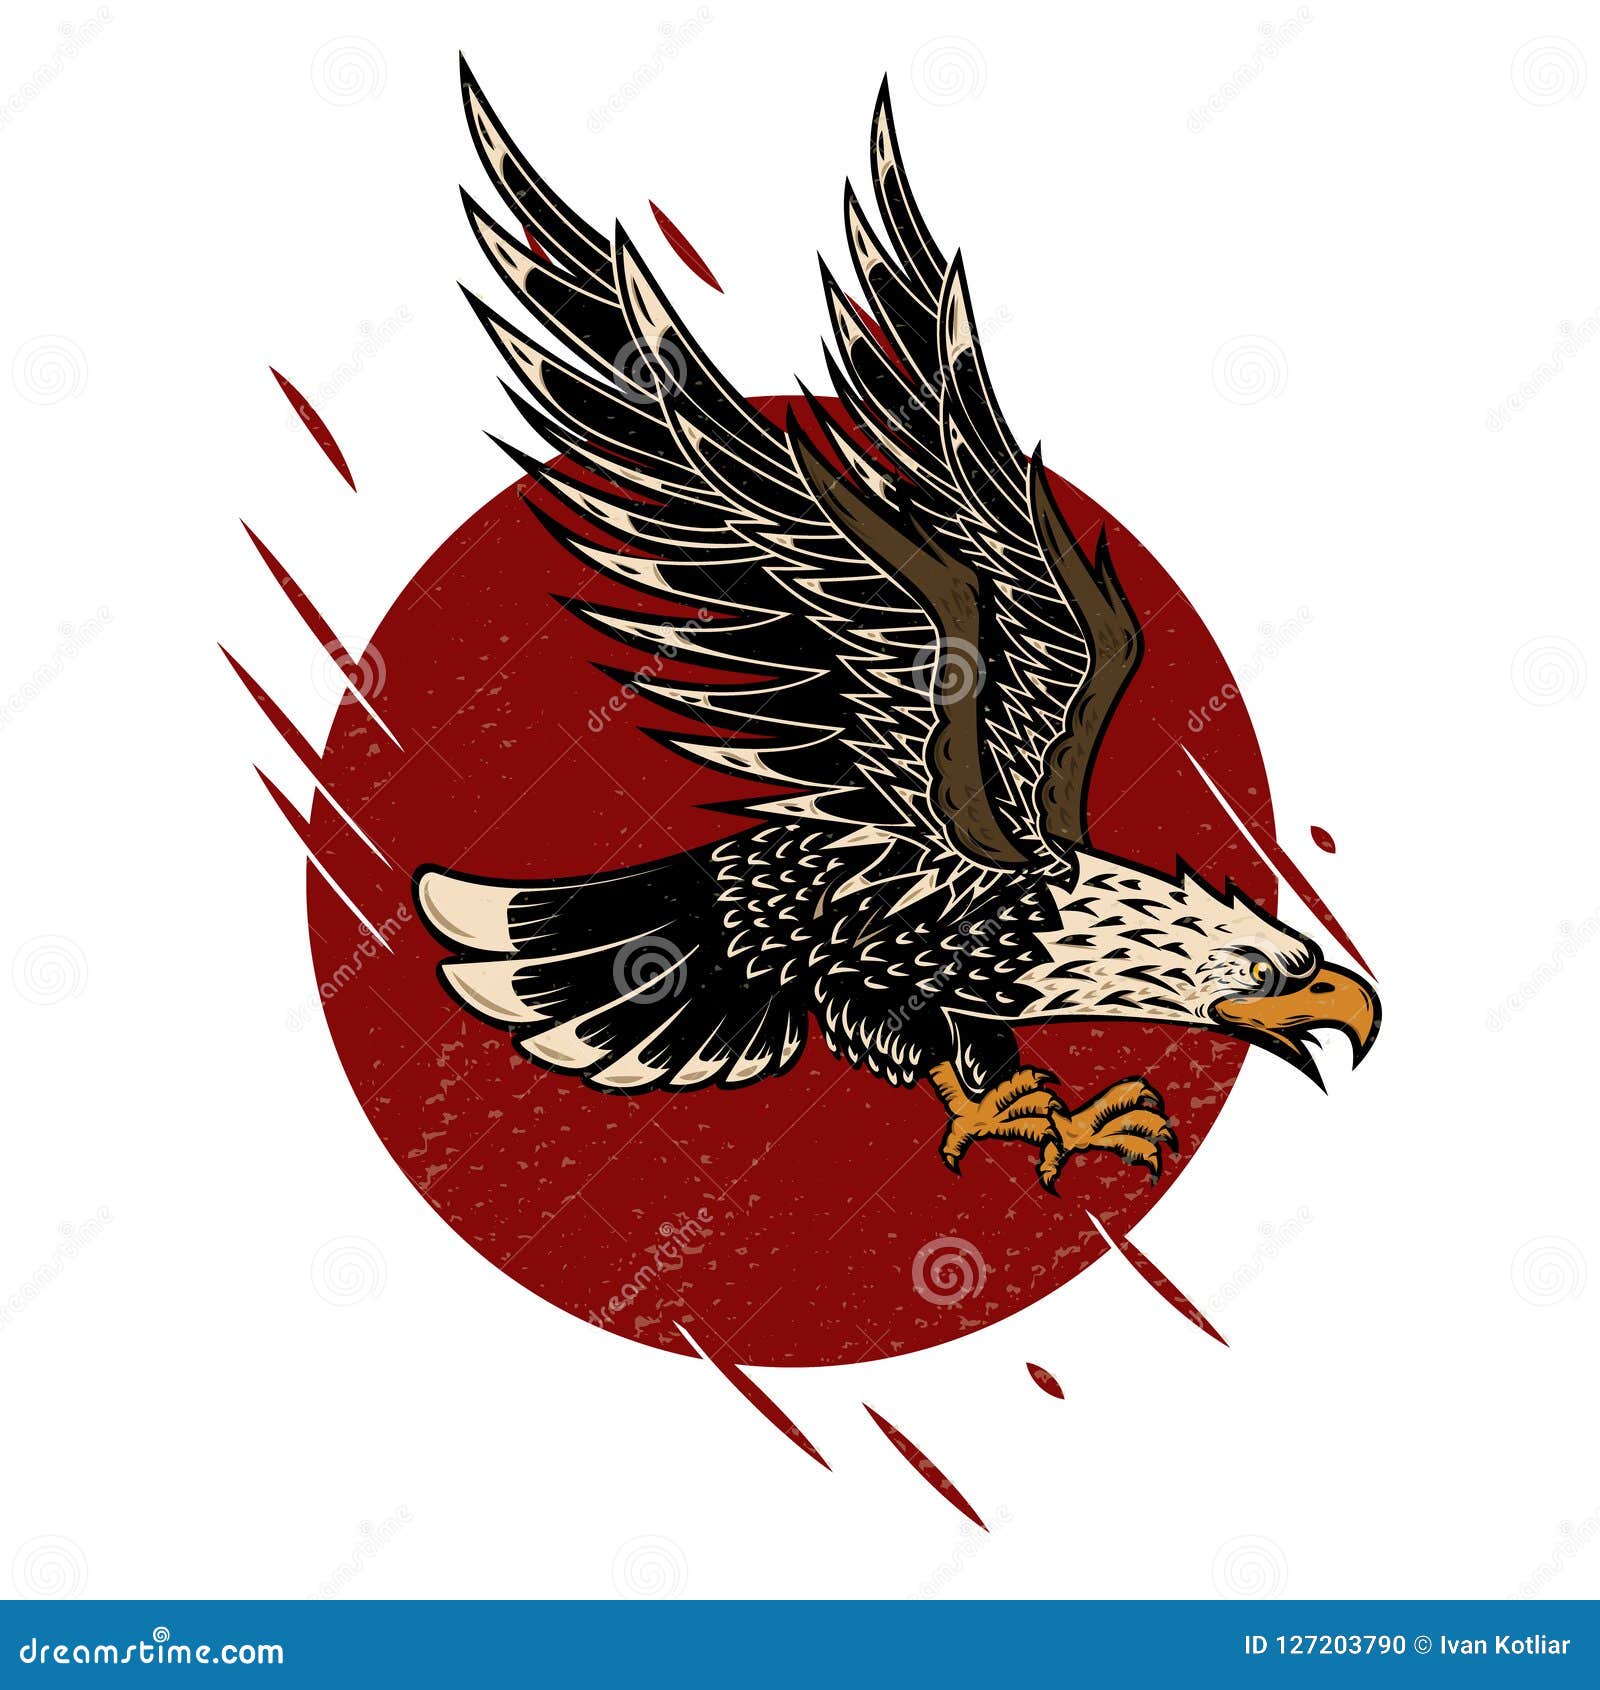 Eagle Tattoo Stock Vector Illustration and Royalty Free Eagle Tattoo Clipart